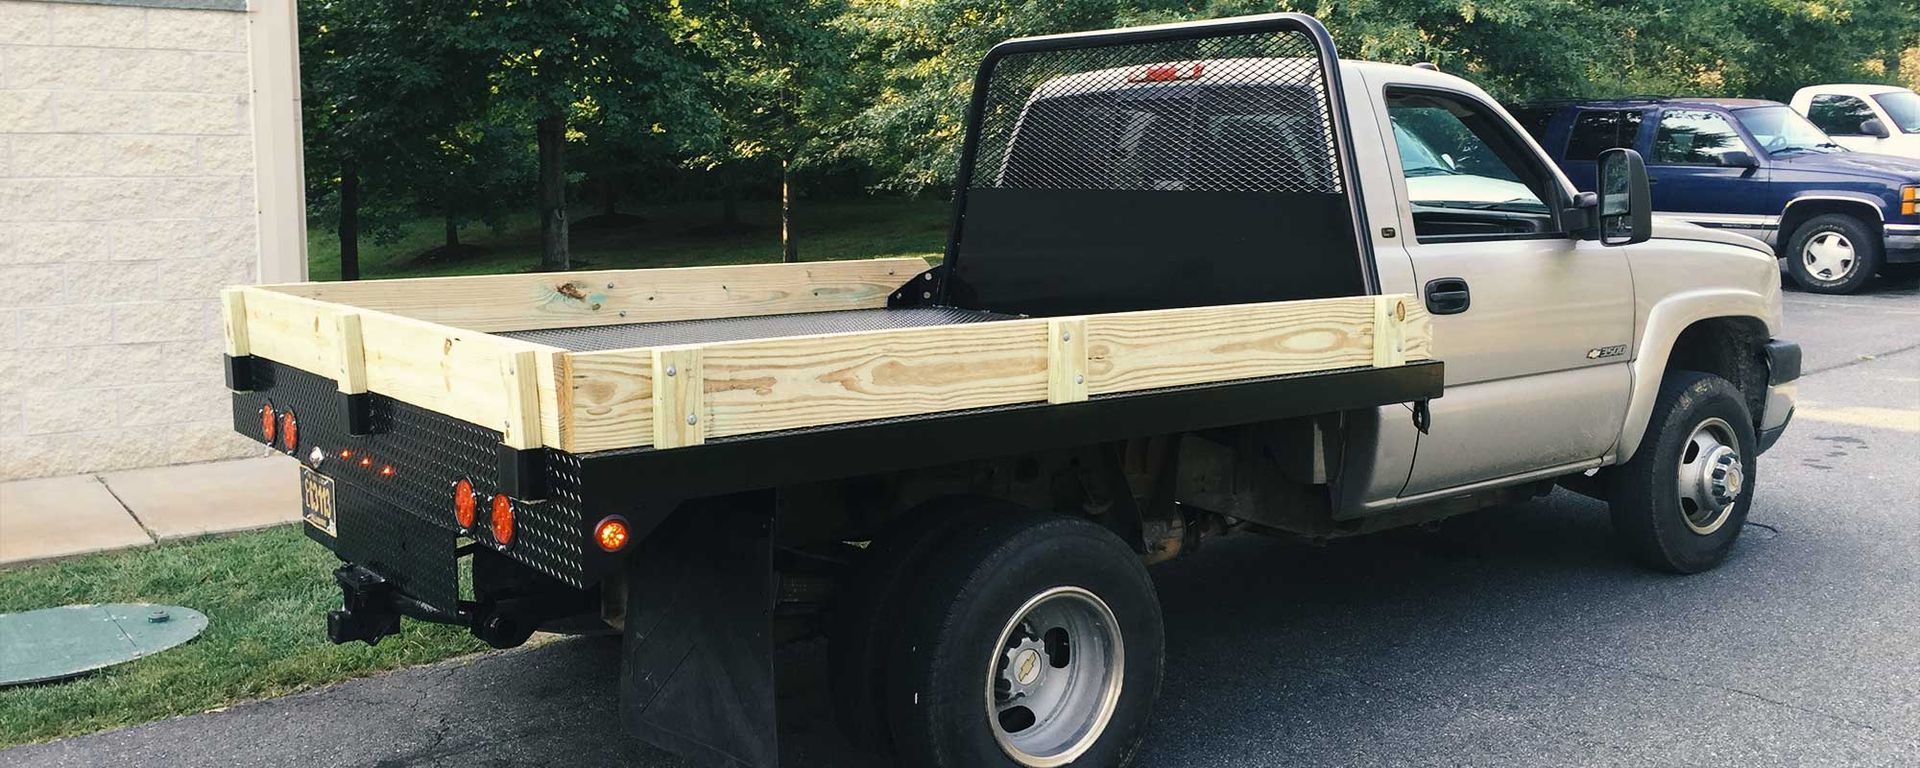 pickup truck modified with fabricated black metal back/bed